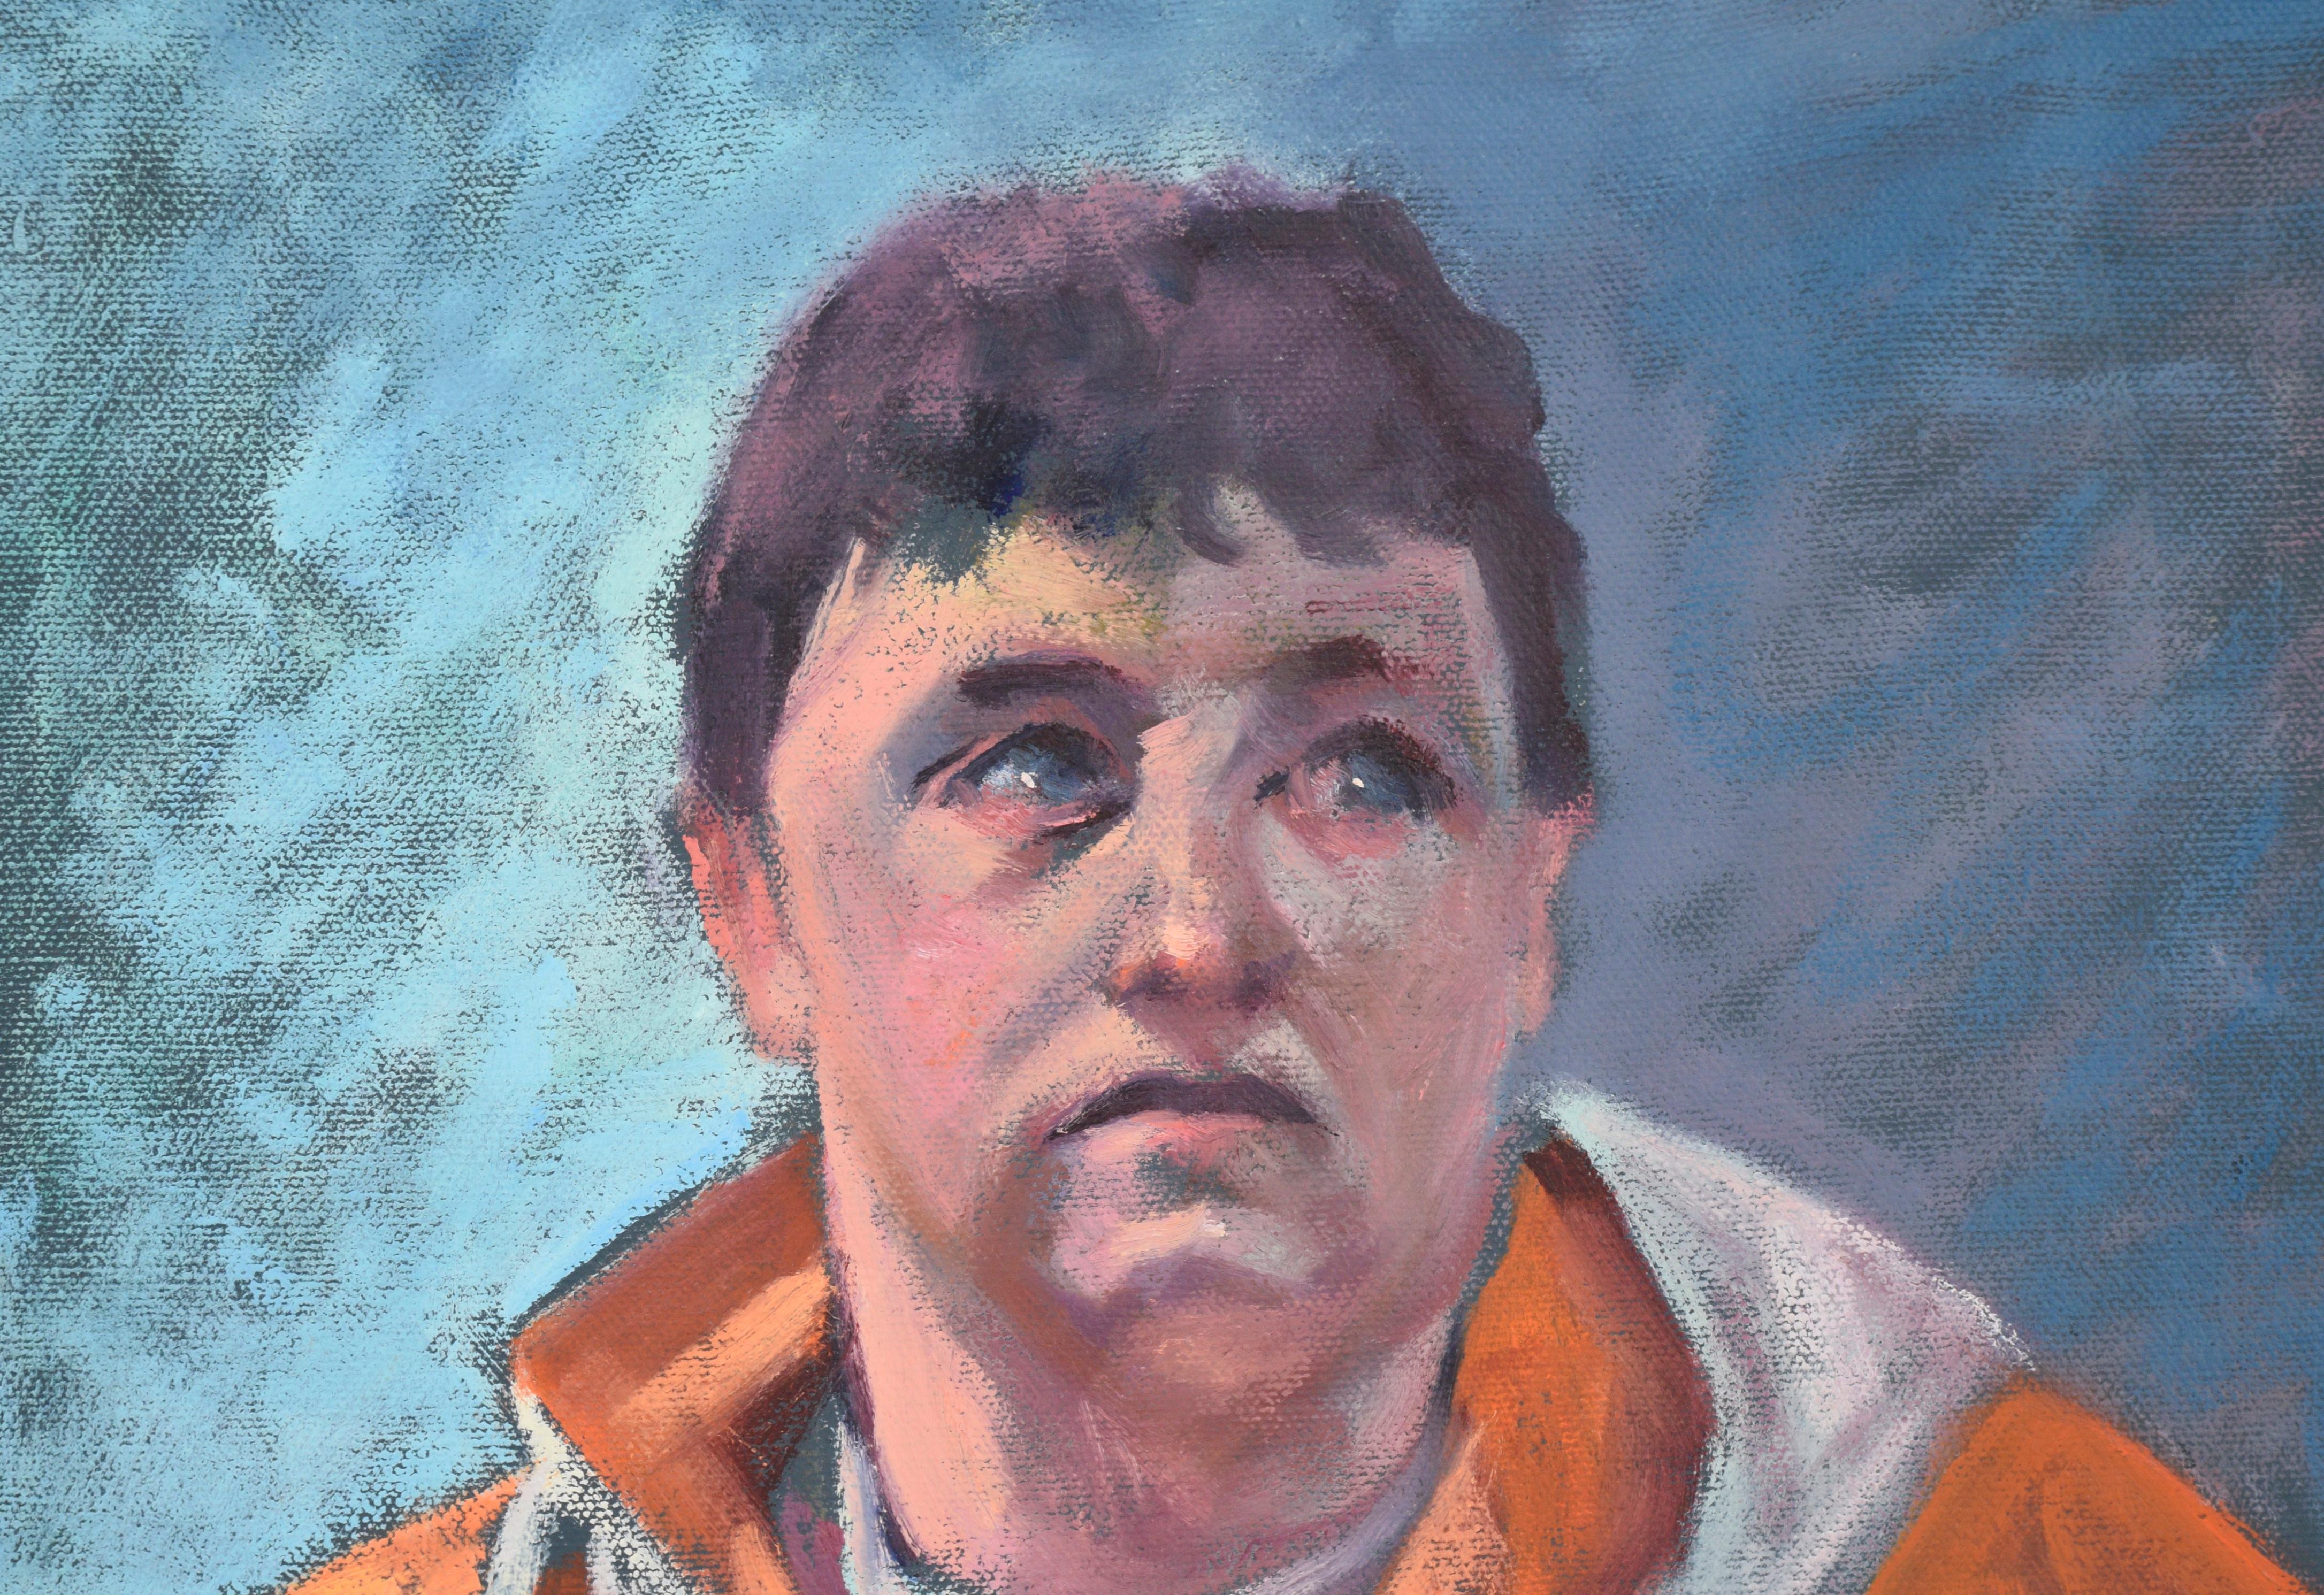 Portrait of a Man with an Orange Jacket in Oil on Canvas - Painting by Alfred Waterman